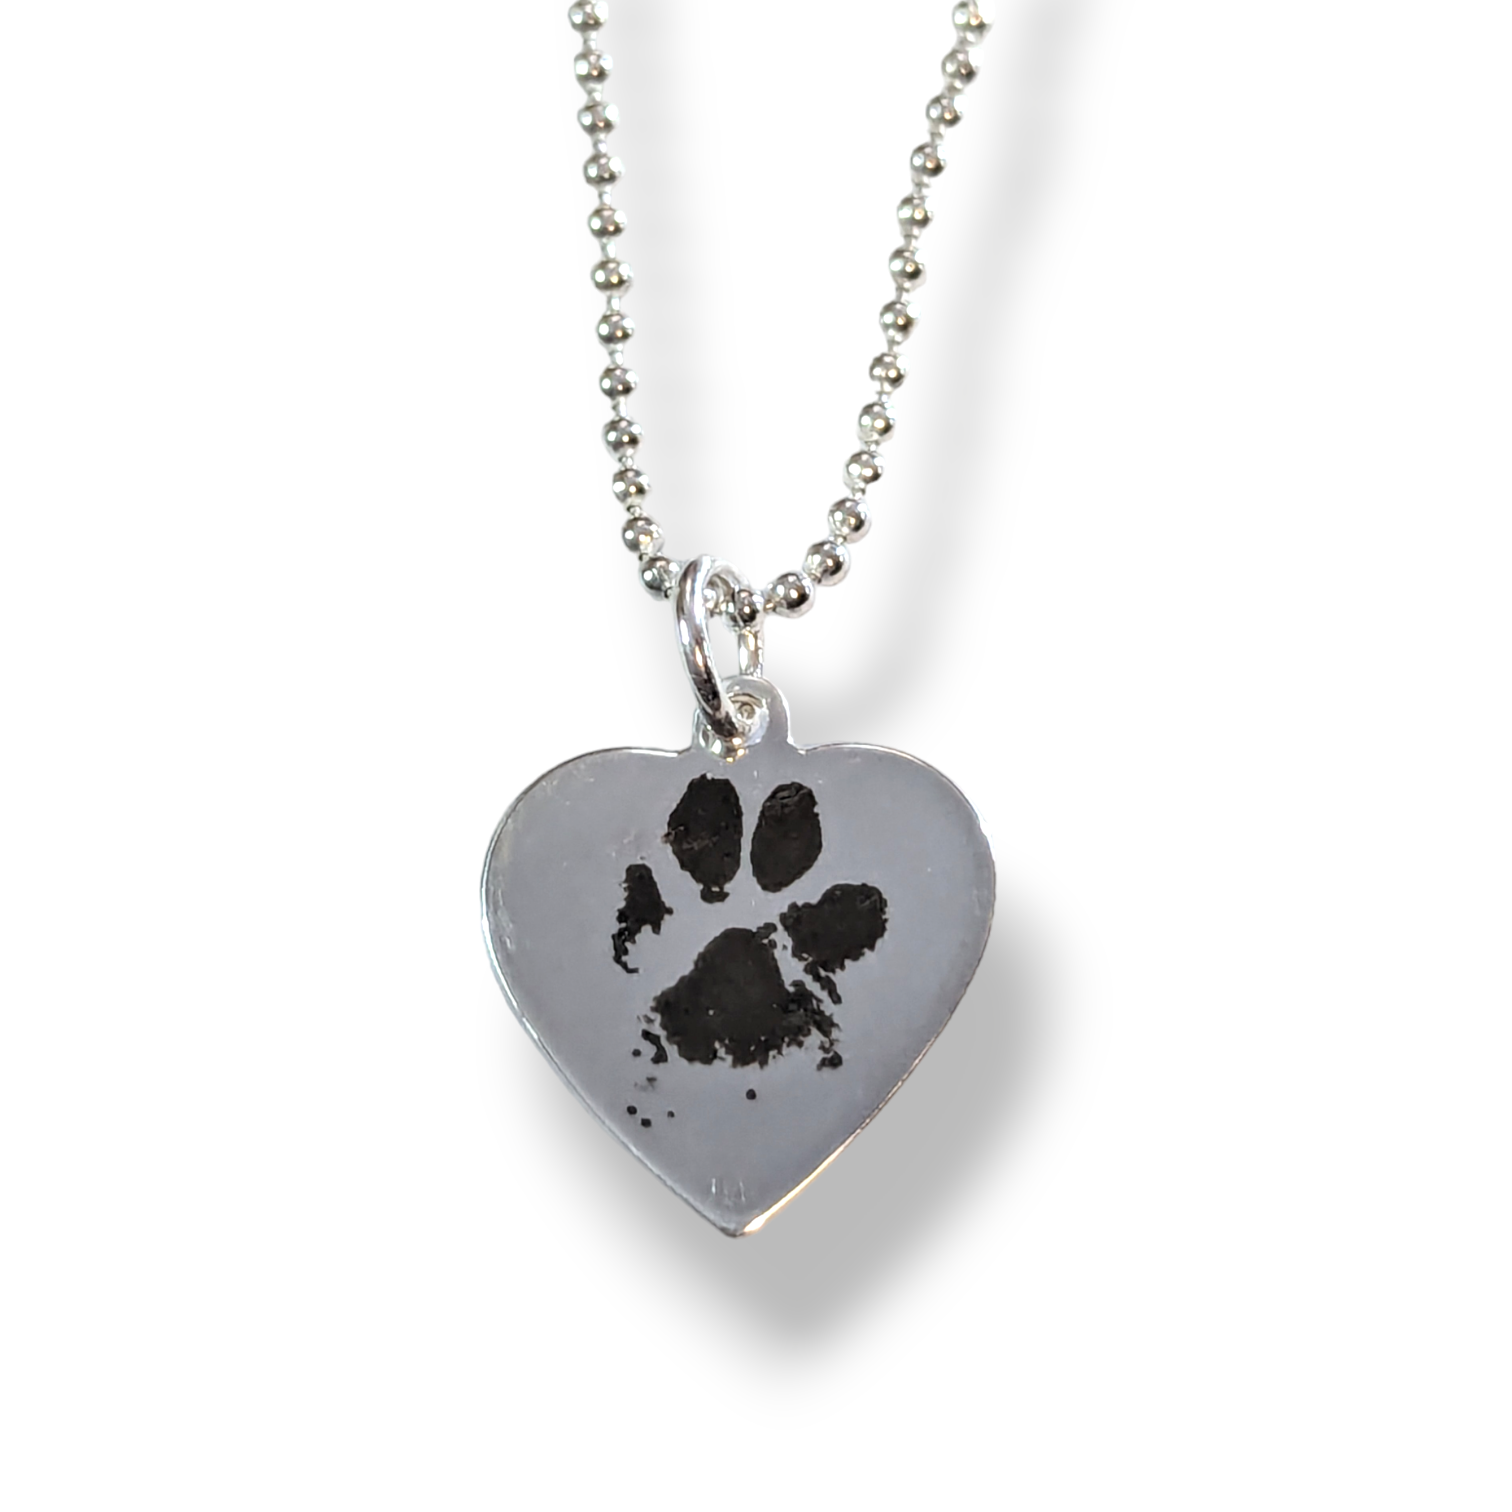 Engraved Paw Print Heart Necklace